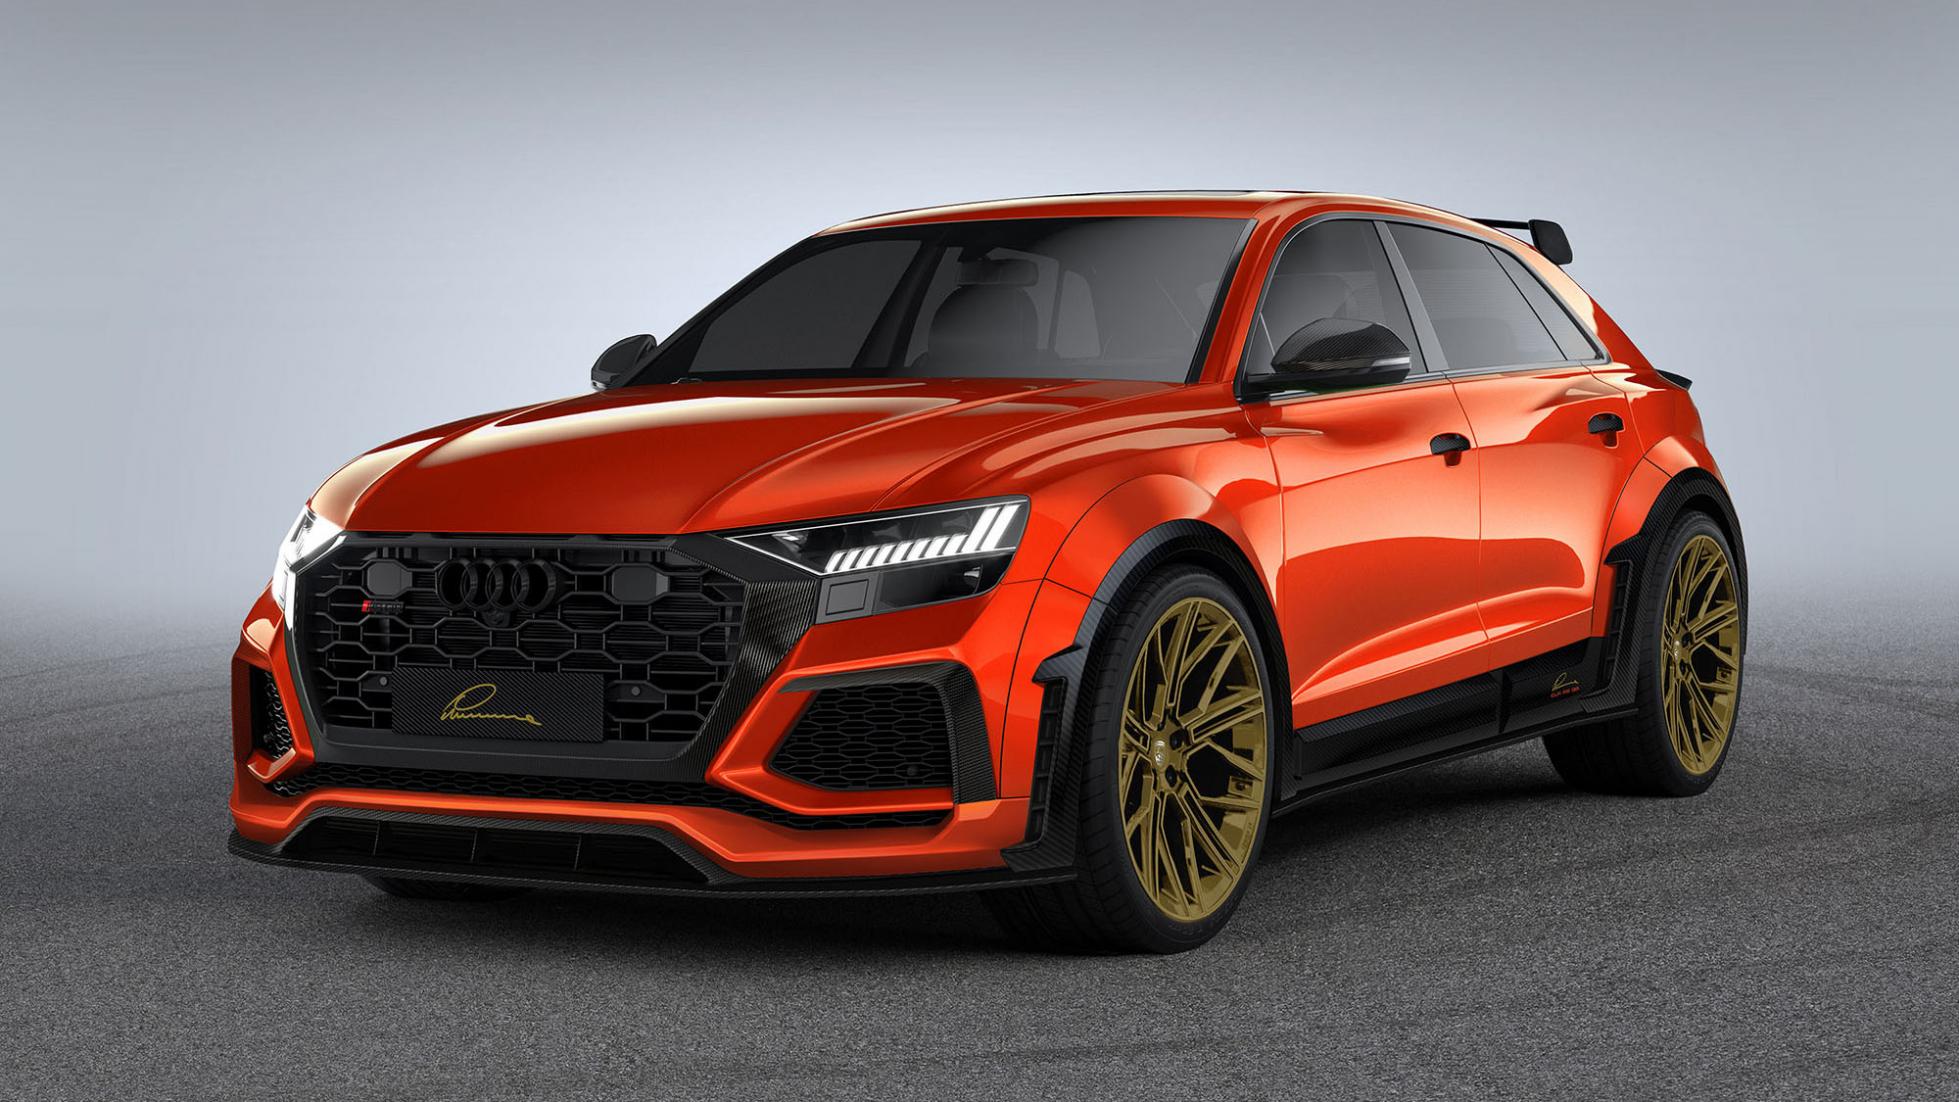 TopGear This modified 700bhp Audi RS Q8 is a subtle, dignified SUV*